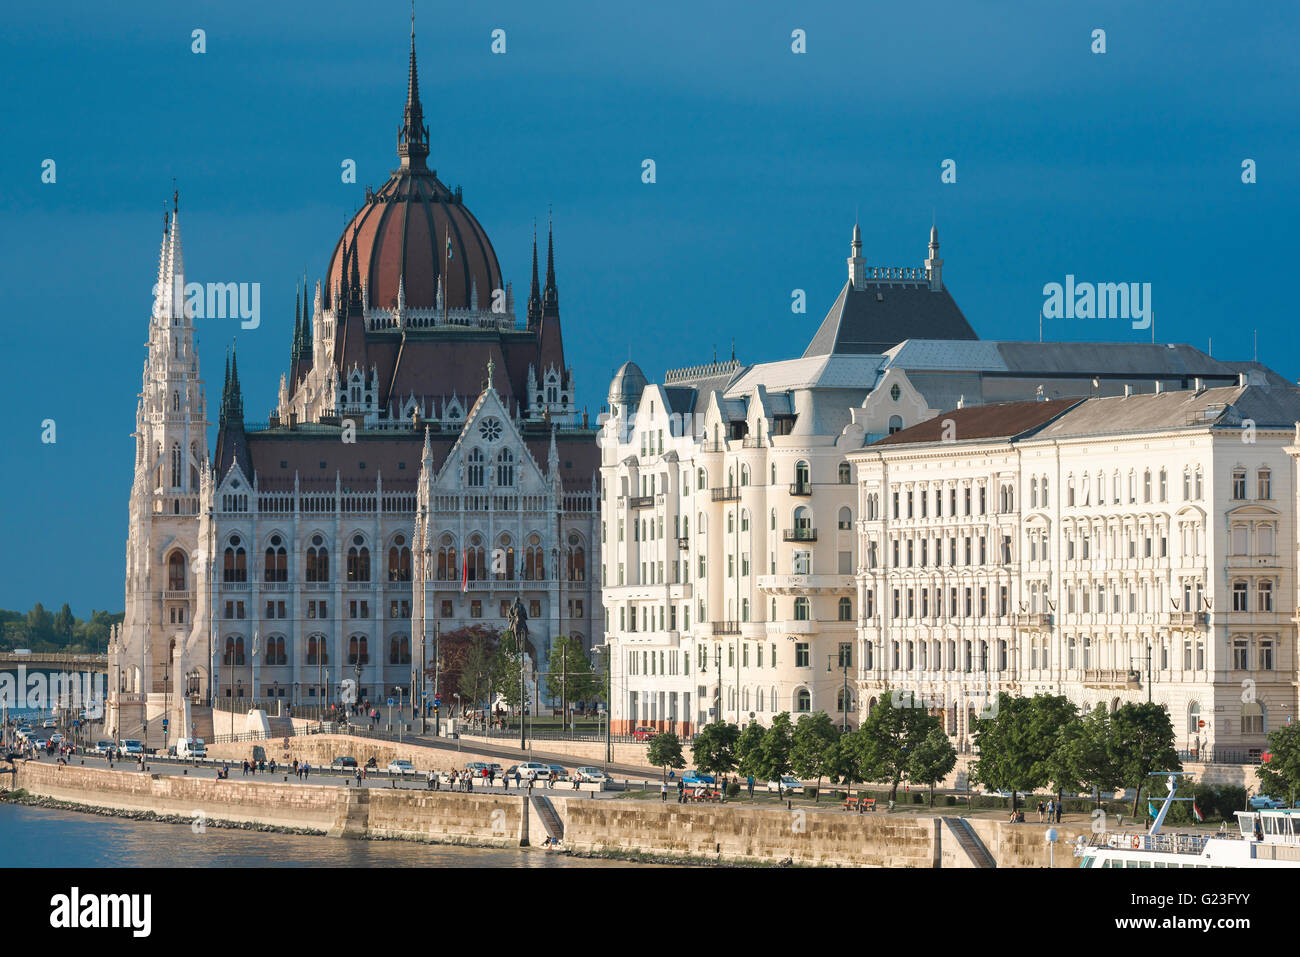 Budapest Parliament Building, view of the the Parliament buildings at sunset in the Lipotvaros area of the city, Hungary. Stock Photo